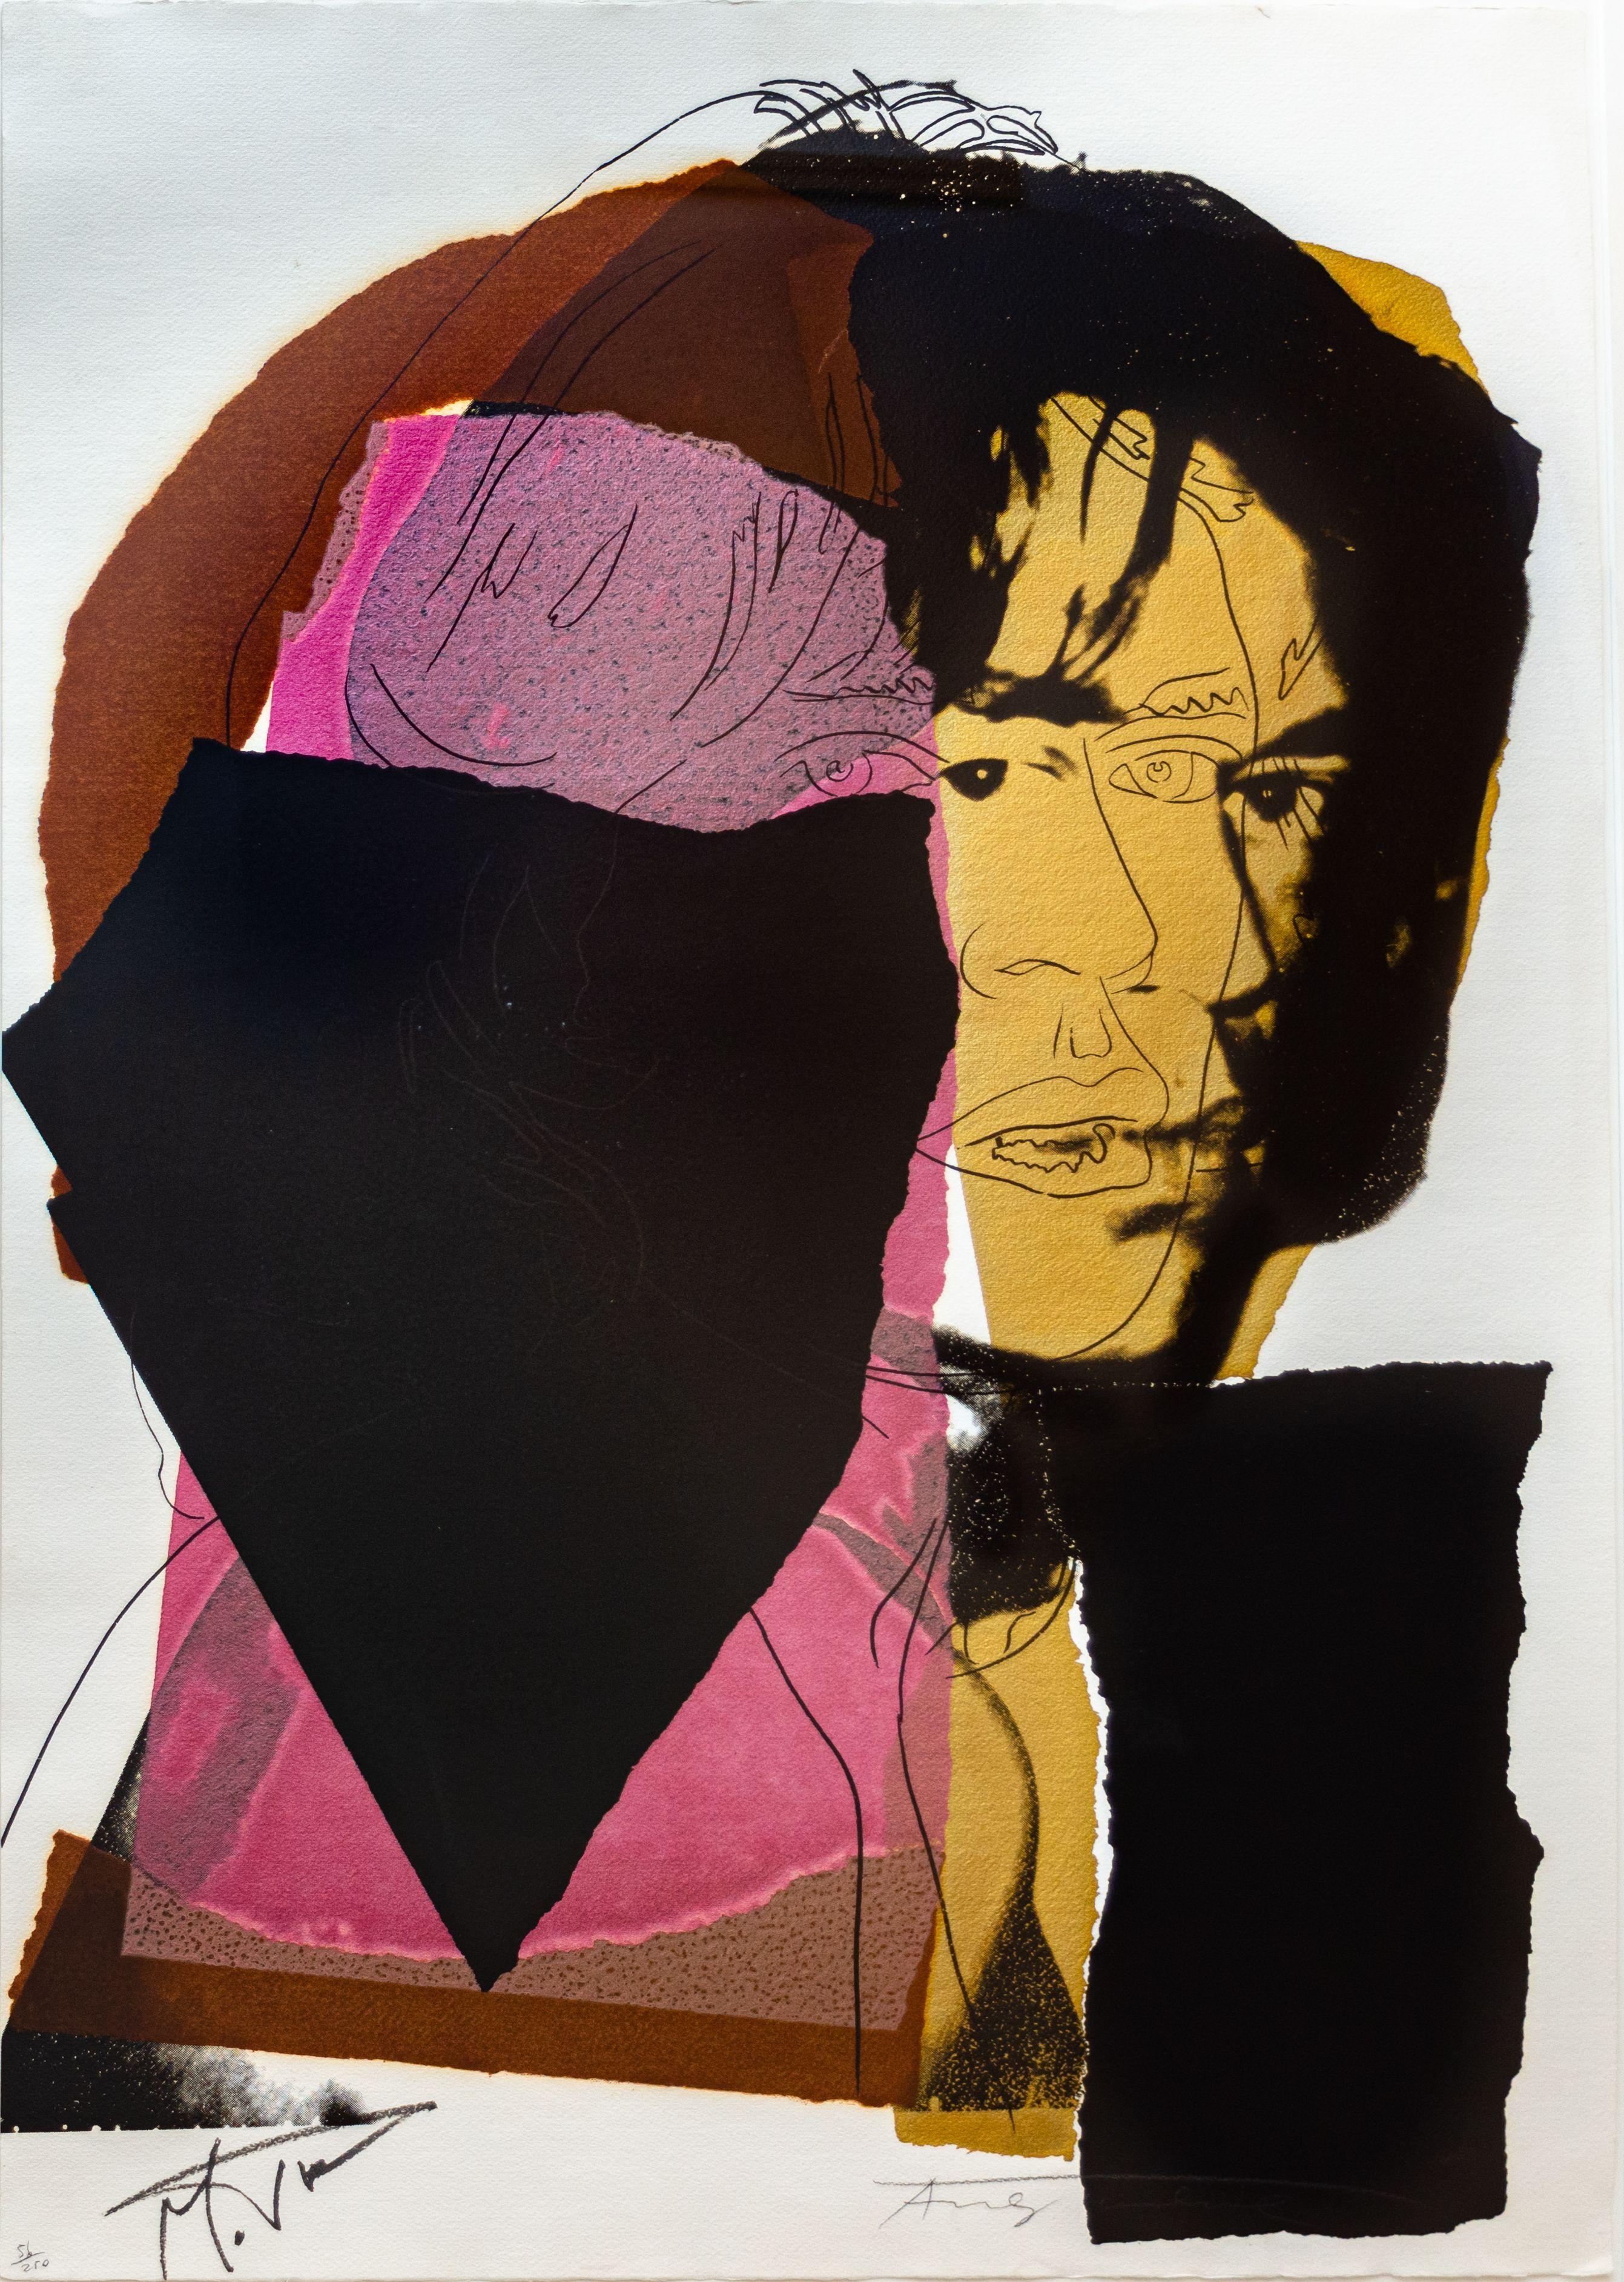 ANDY WARHOL (1928-1987)

This 'Mick Jagger' piece is a 1975 screenprint in colors on Arches Aquarelle paper that is signed and numbered ‘Andy Warhol' by the artist in pencil and ‘Mick Jagger’ by the sitter in felt-tip pen. This work Edition 56 from